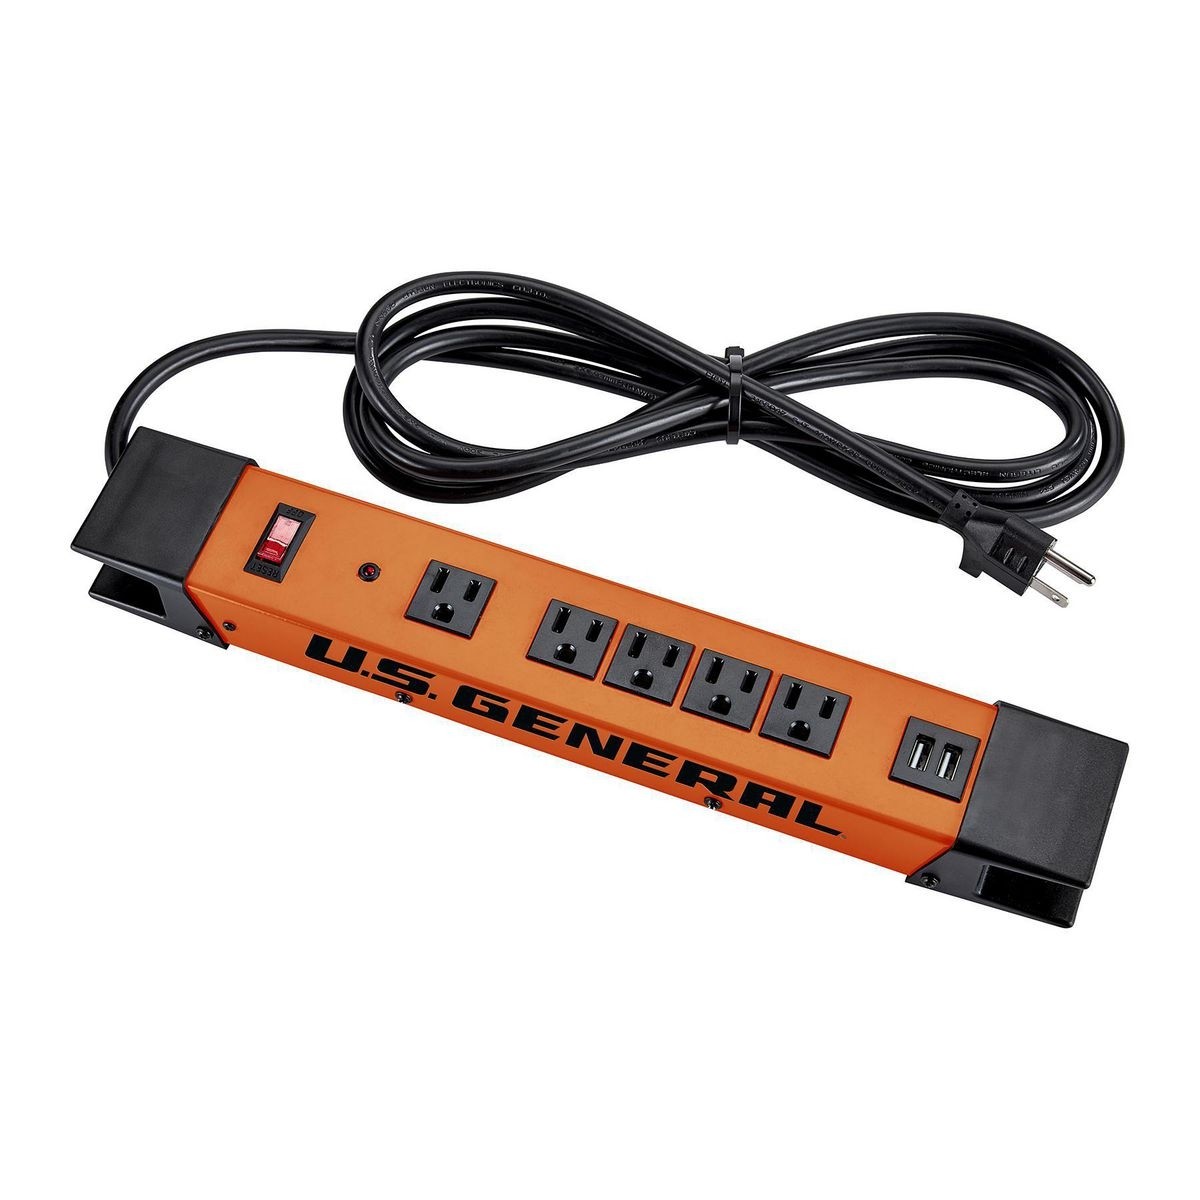 U.S. GENERAL 5 Outlet Magnetic Power Strip With Metal Housing And 2 USB Ports – Orange – Item 57250